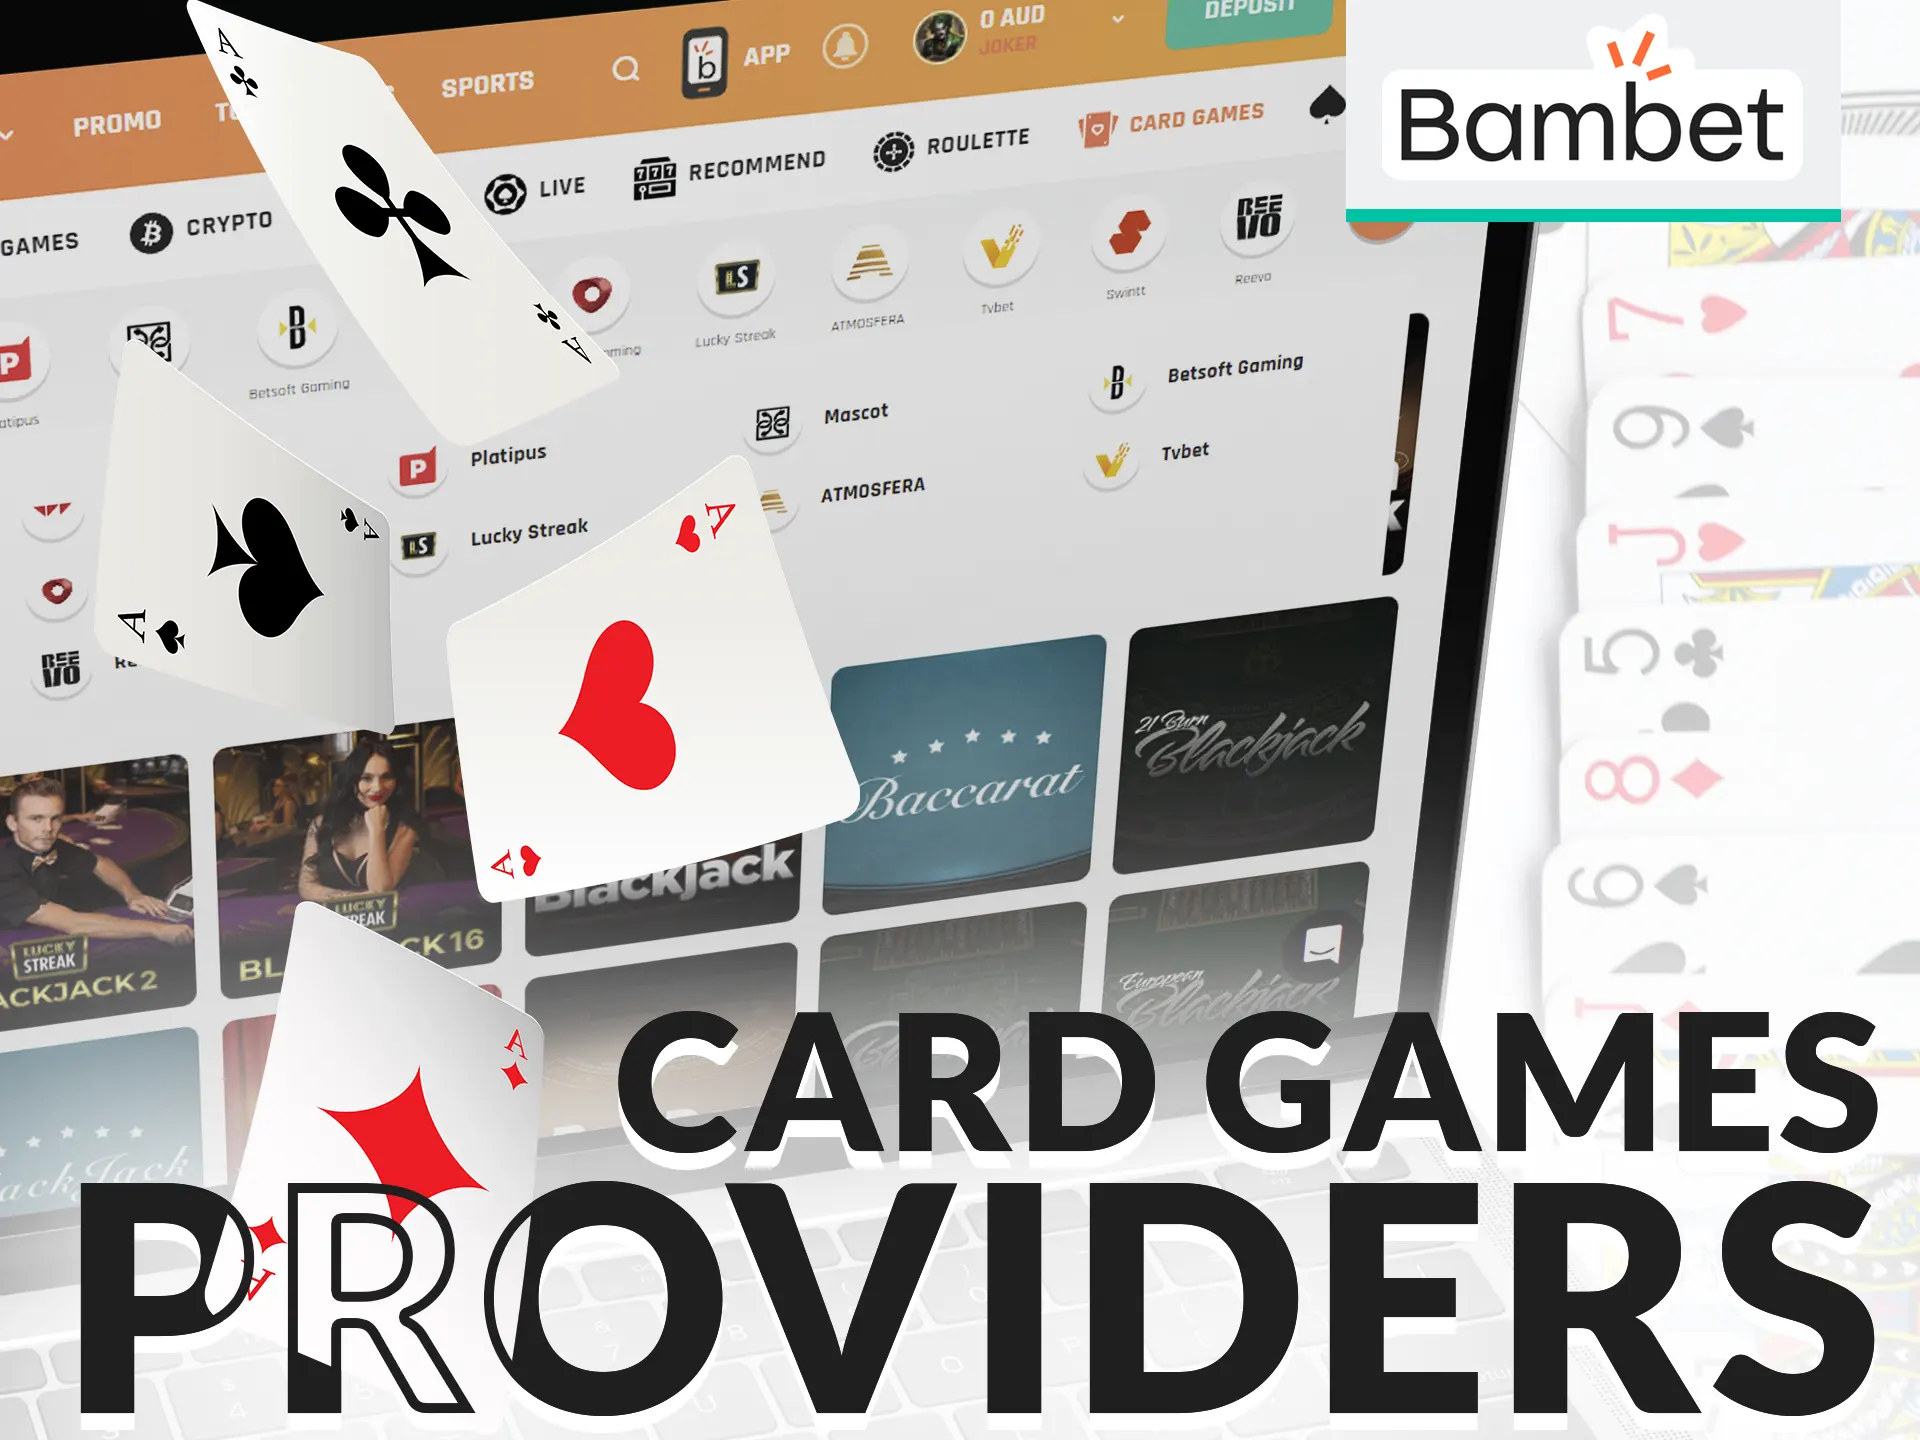 Familiarise yourself with the card game providers of the Bambet website.